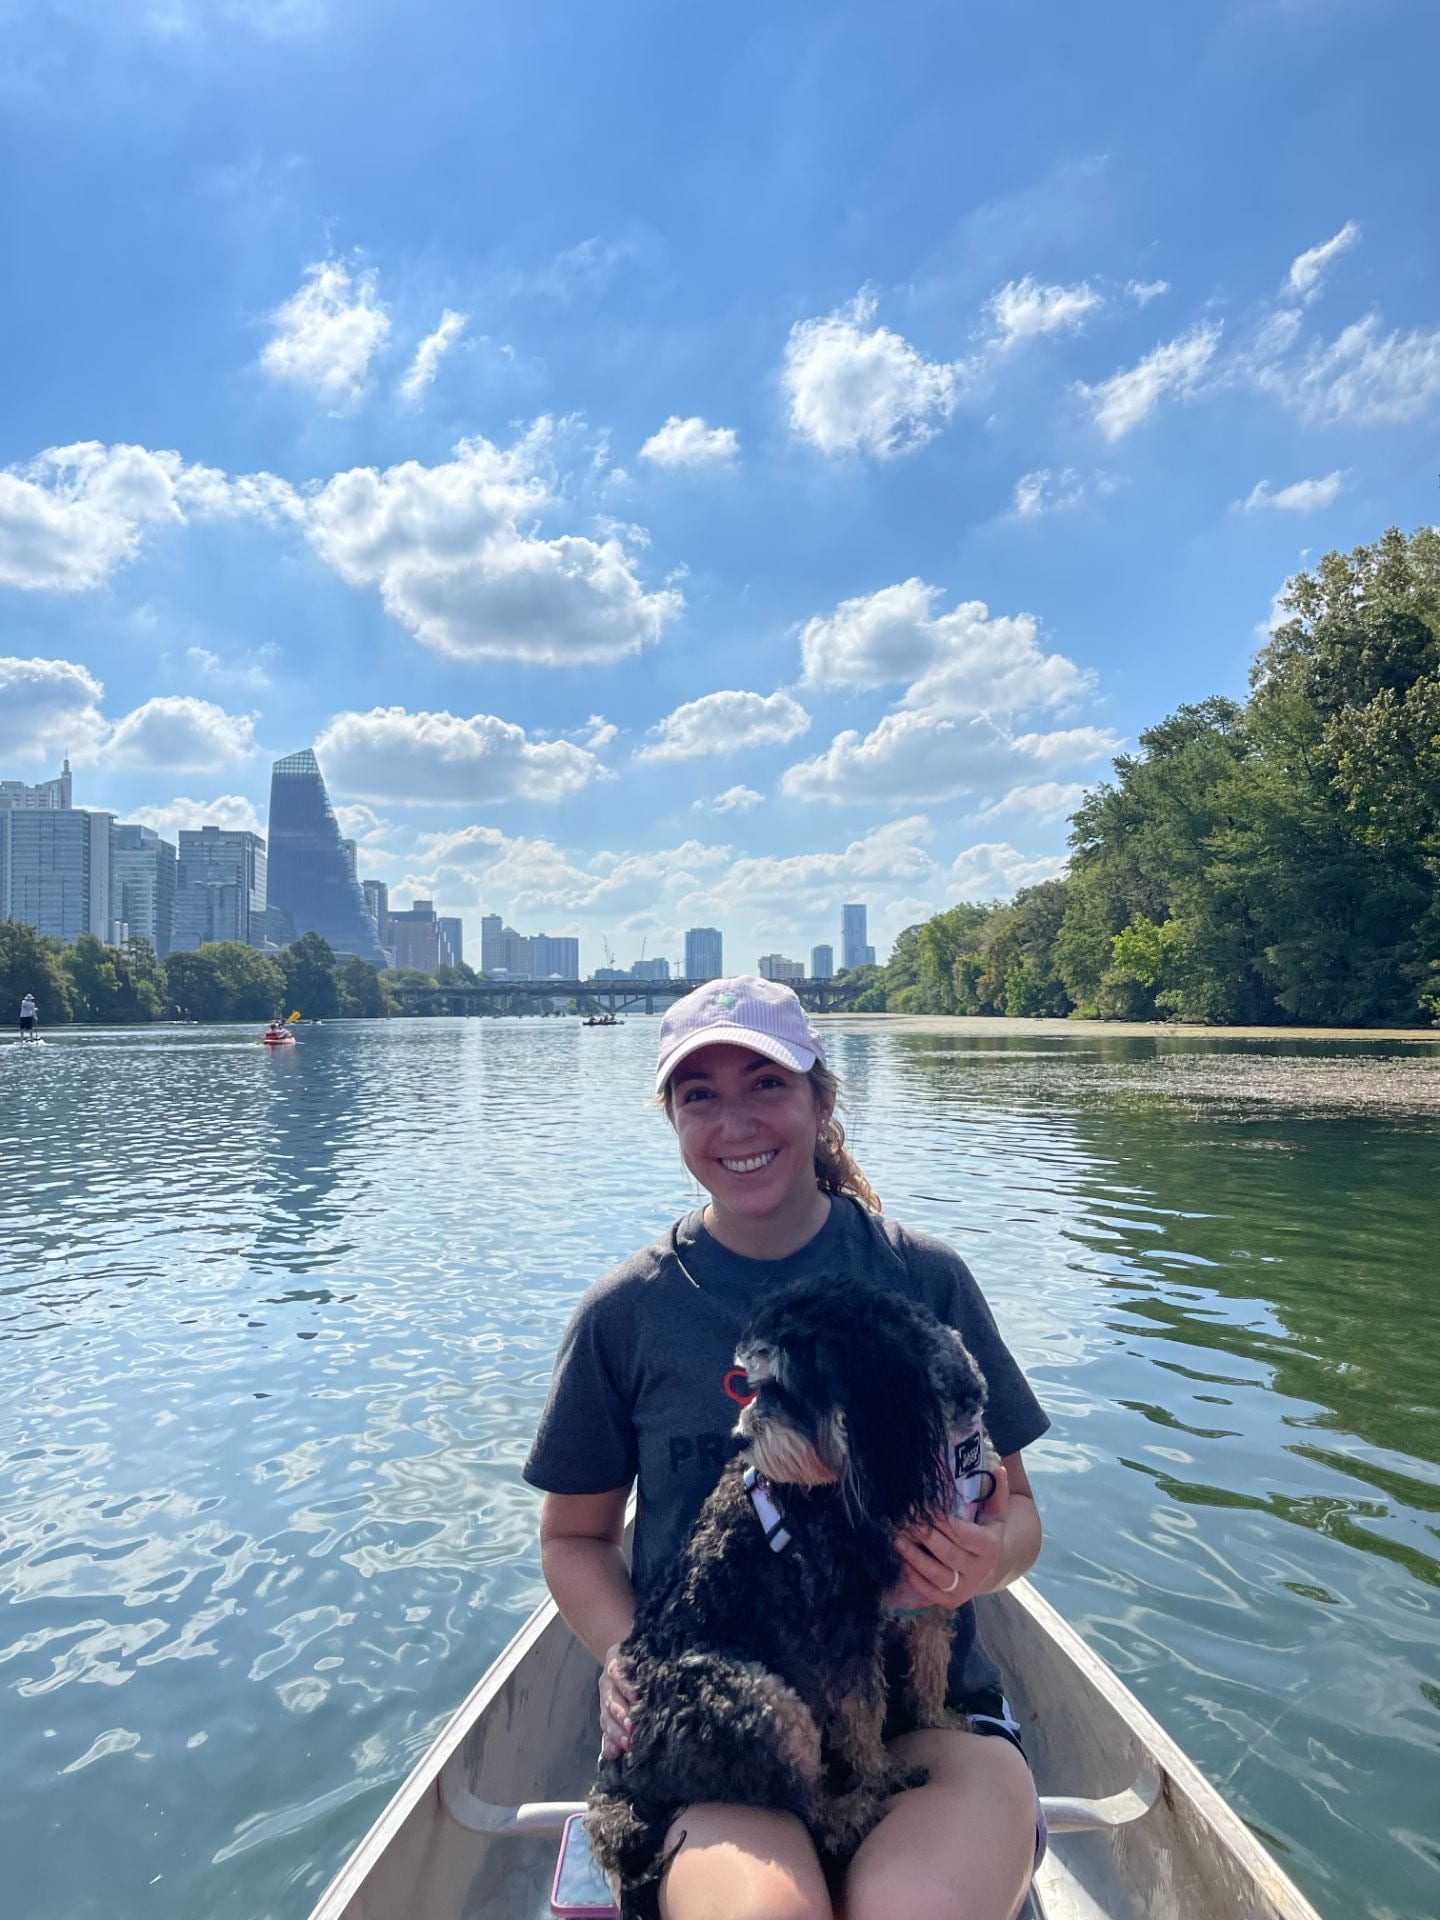 Marion enjoying a sunny afternoon in a canoe on Lady Bird Lake in Austin, Texas.